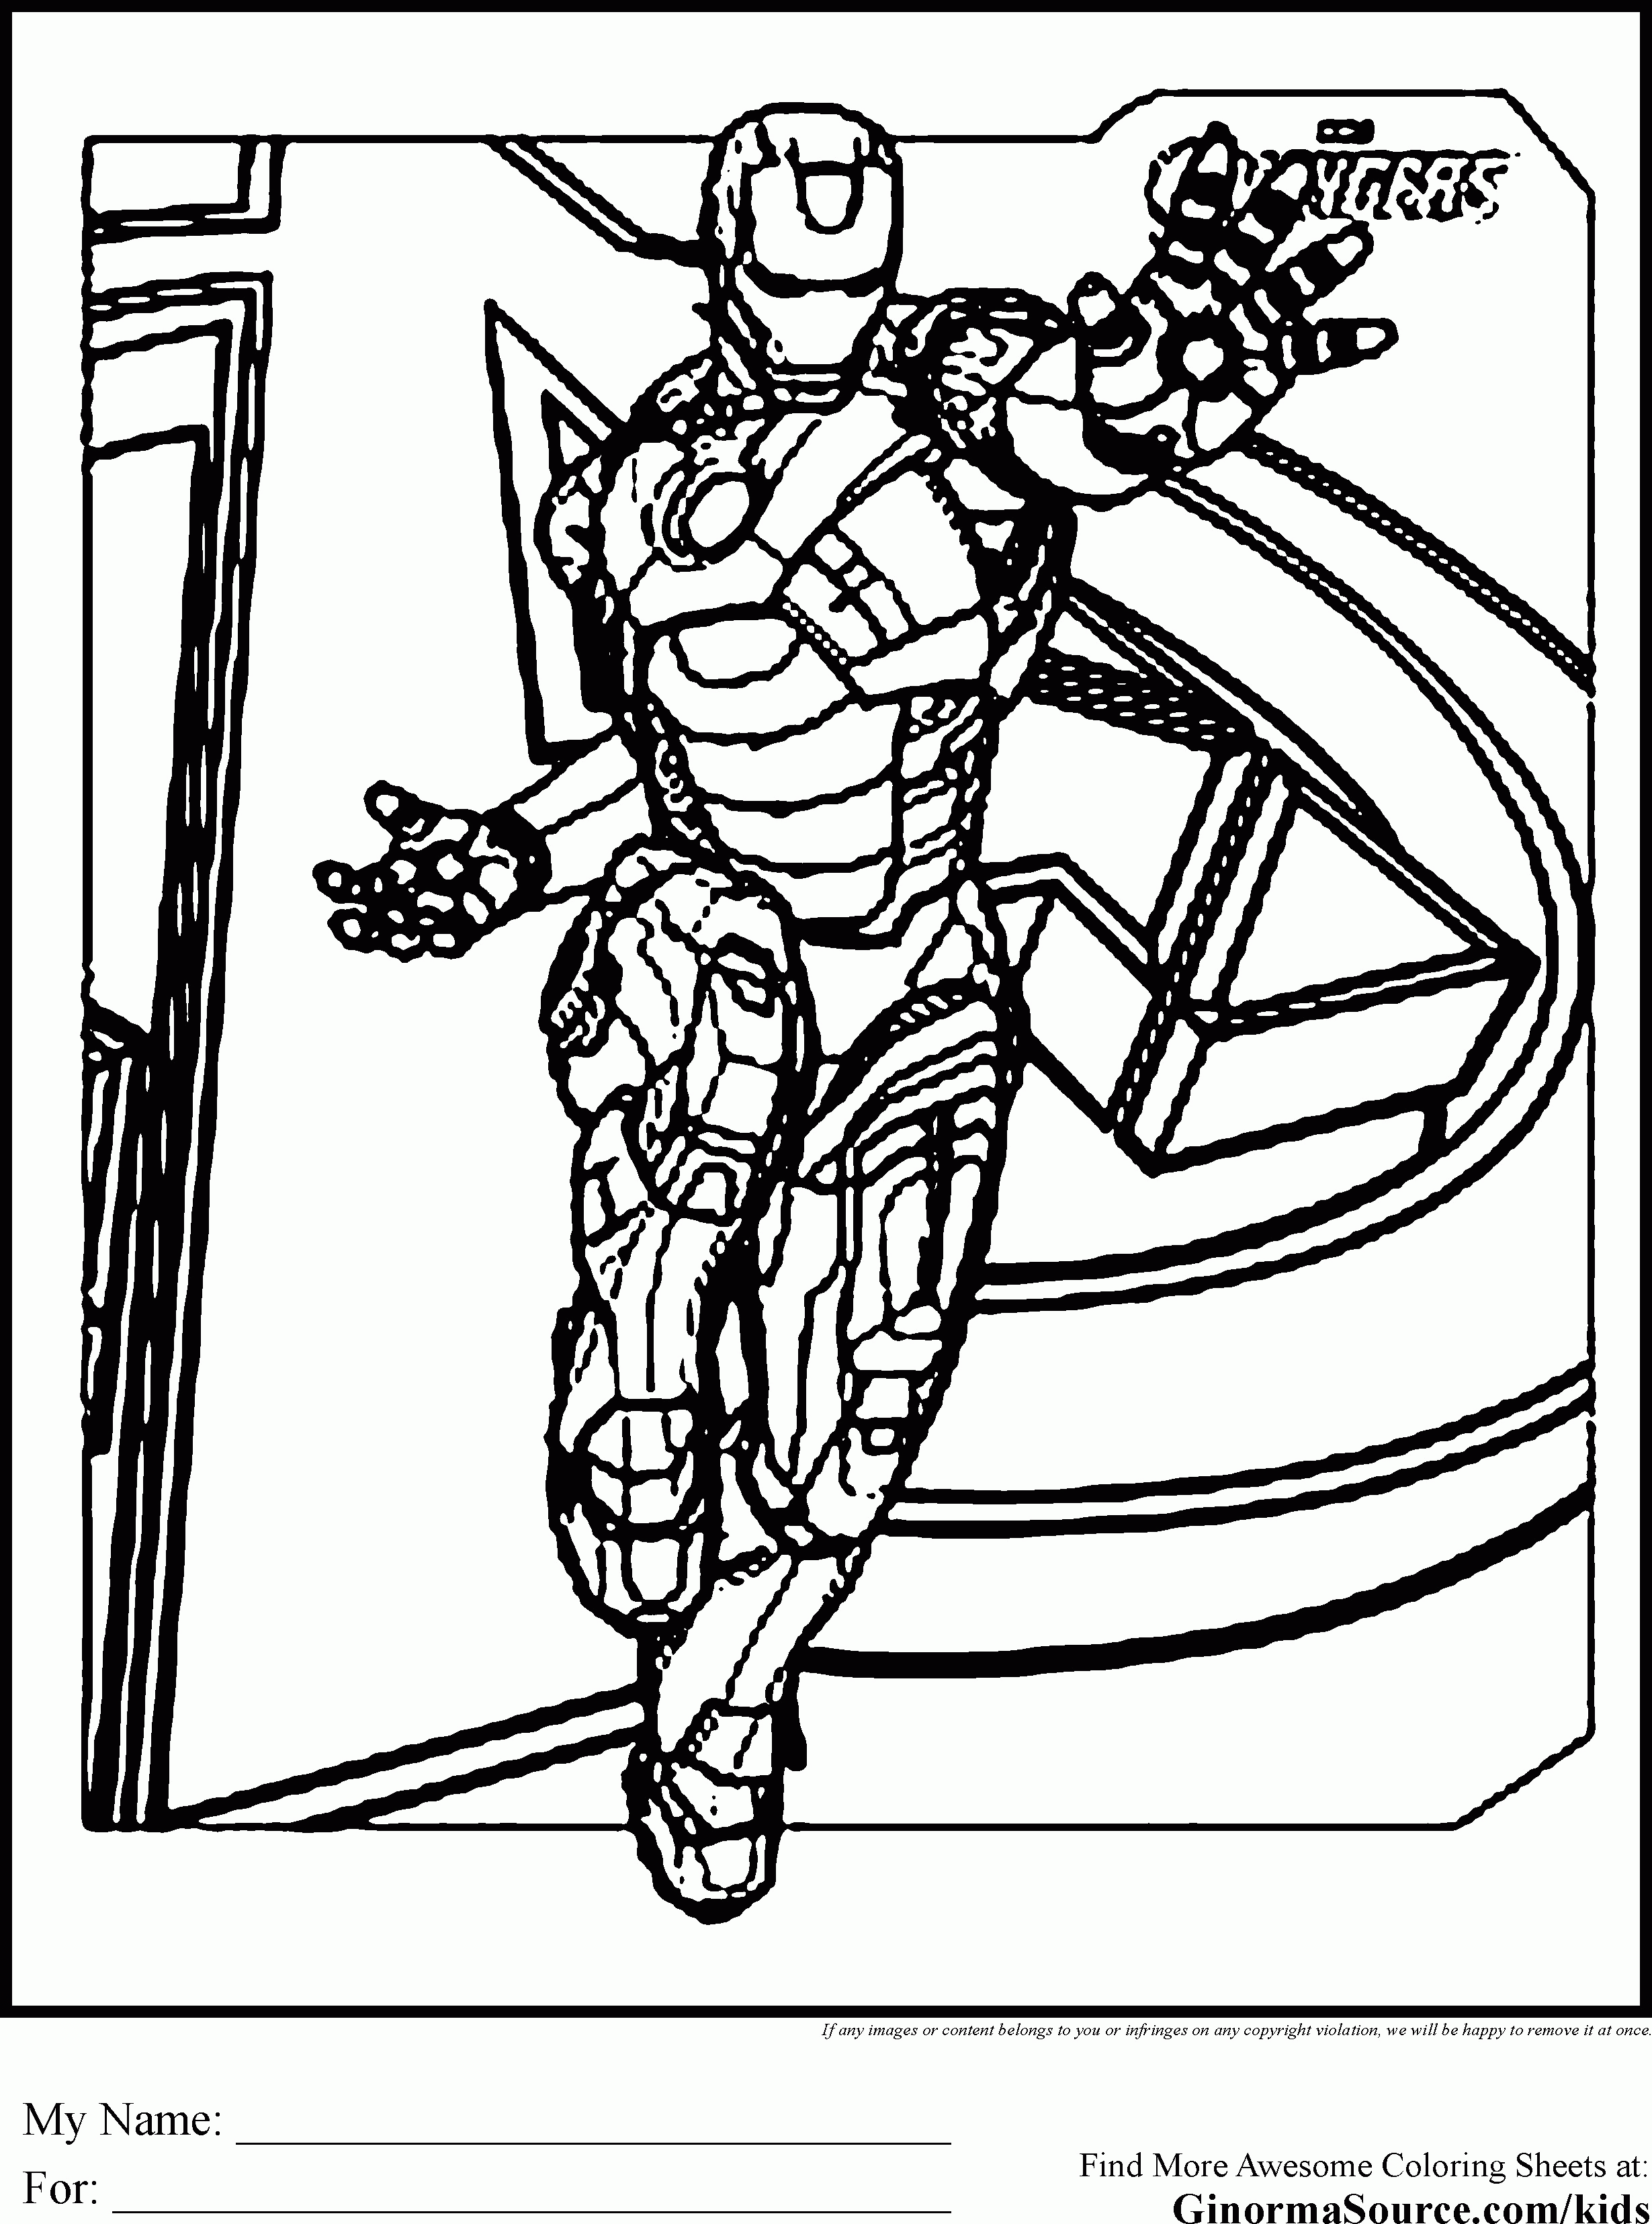 Avengers Coloring Pages For Kids pdf online - Coloring pages